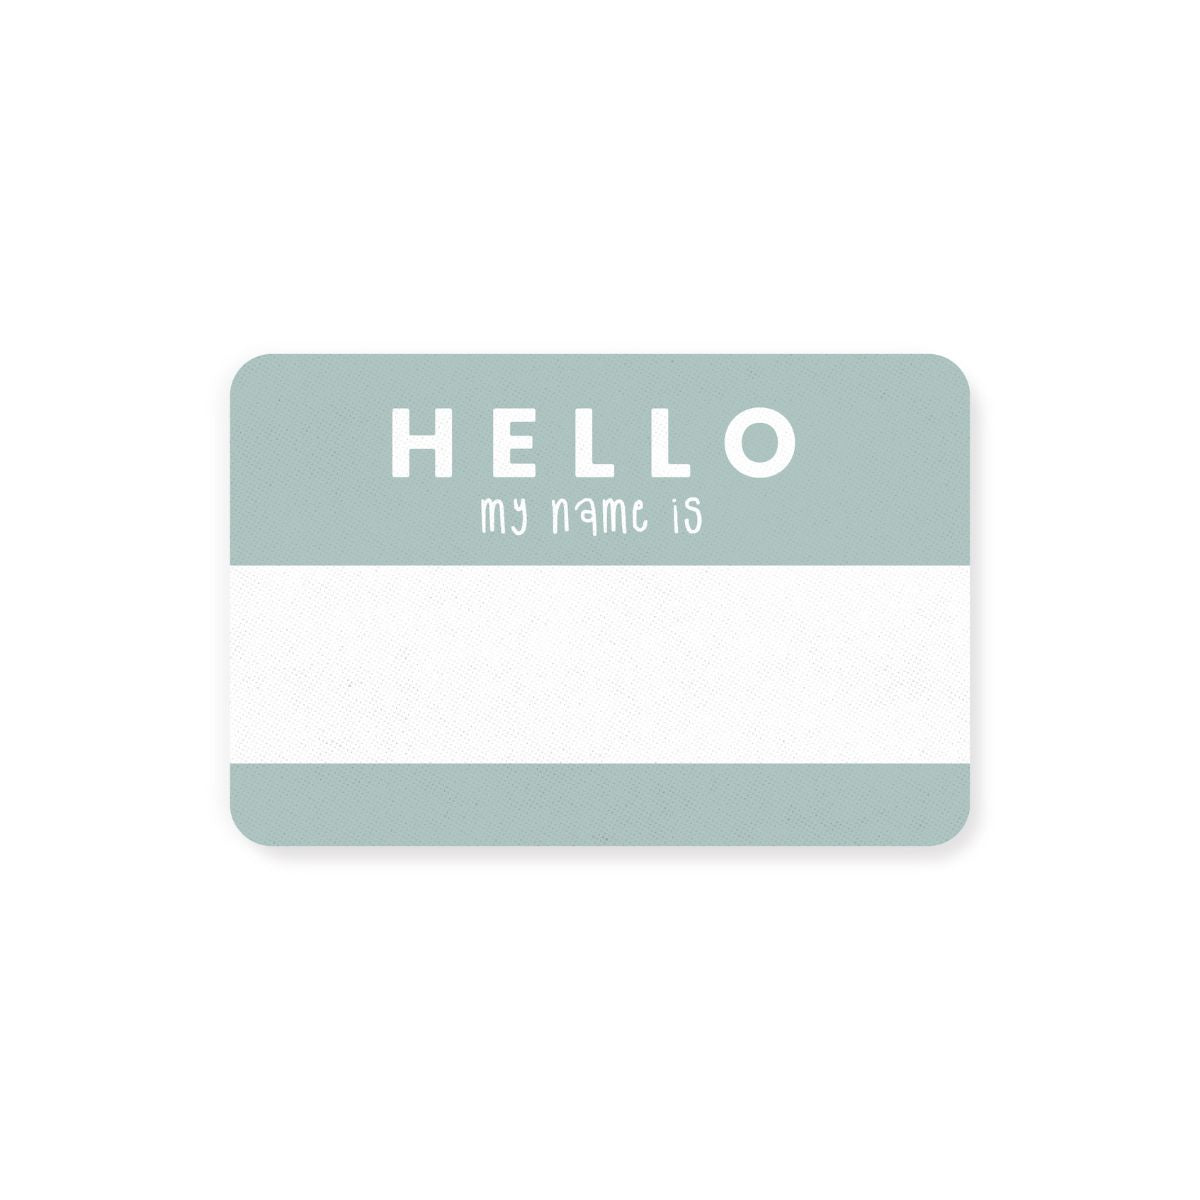 Baby Cubby Hello Sticker - Bold Font - Dusty Blue / White